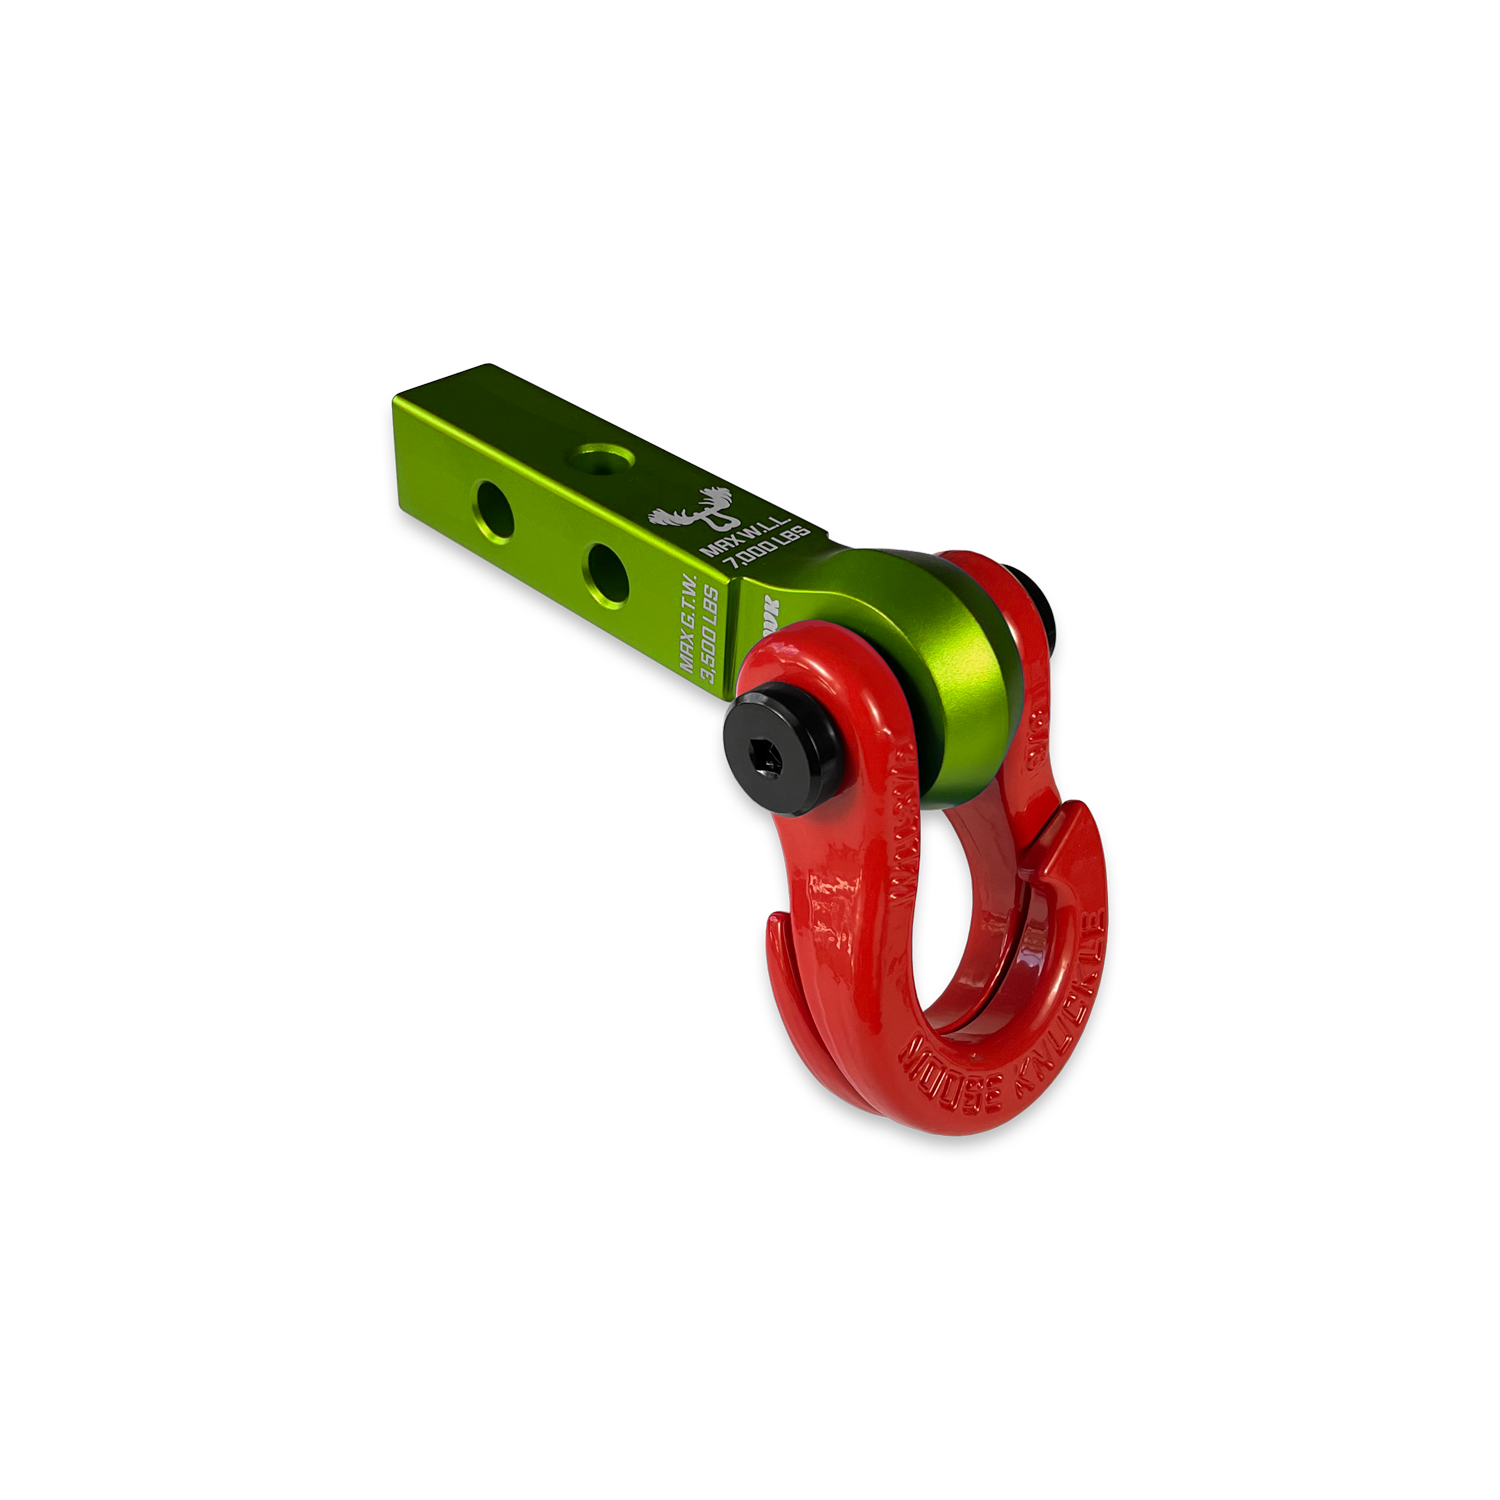 Jowl 5/8 Split Shackle & 1.25 Receiver (Bean Green and Flame Red)